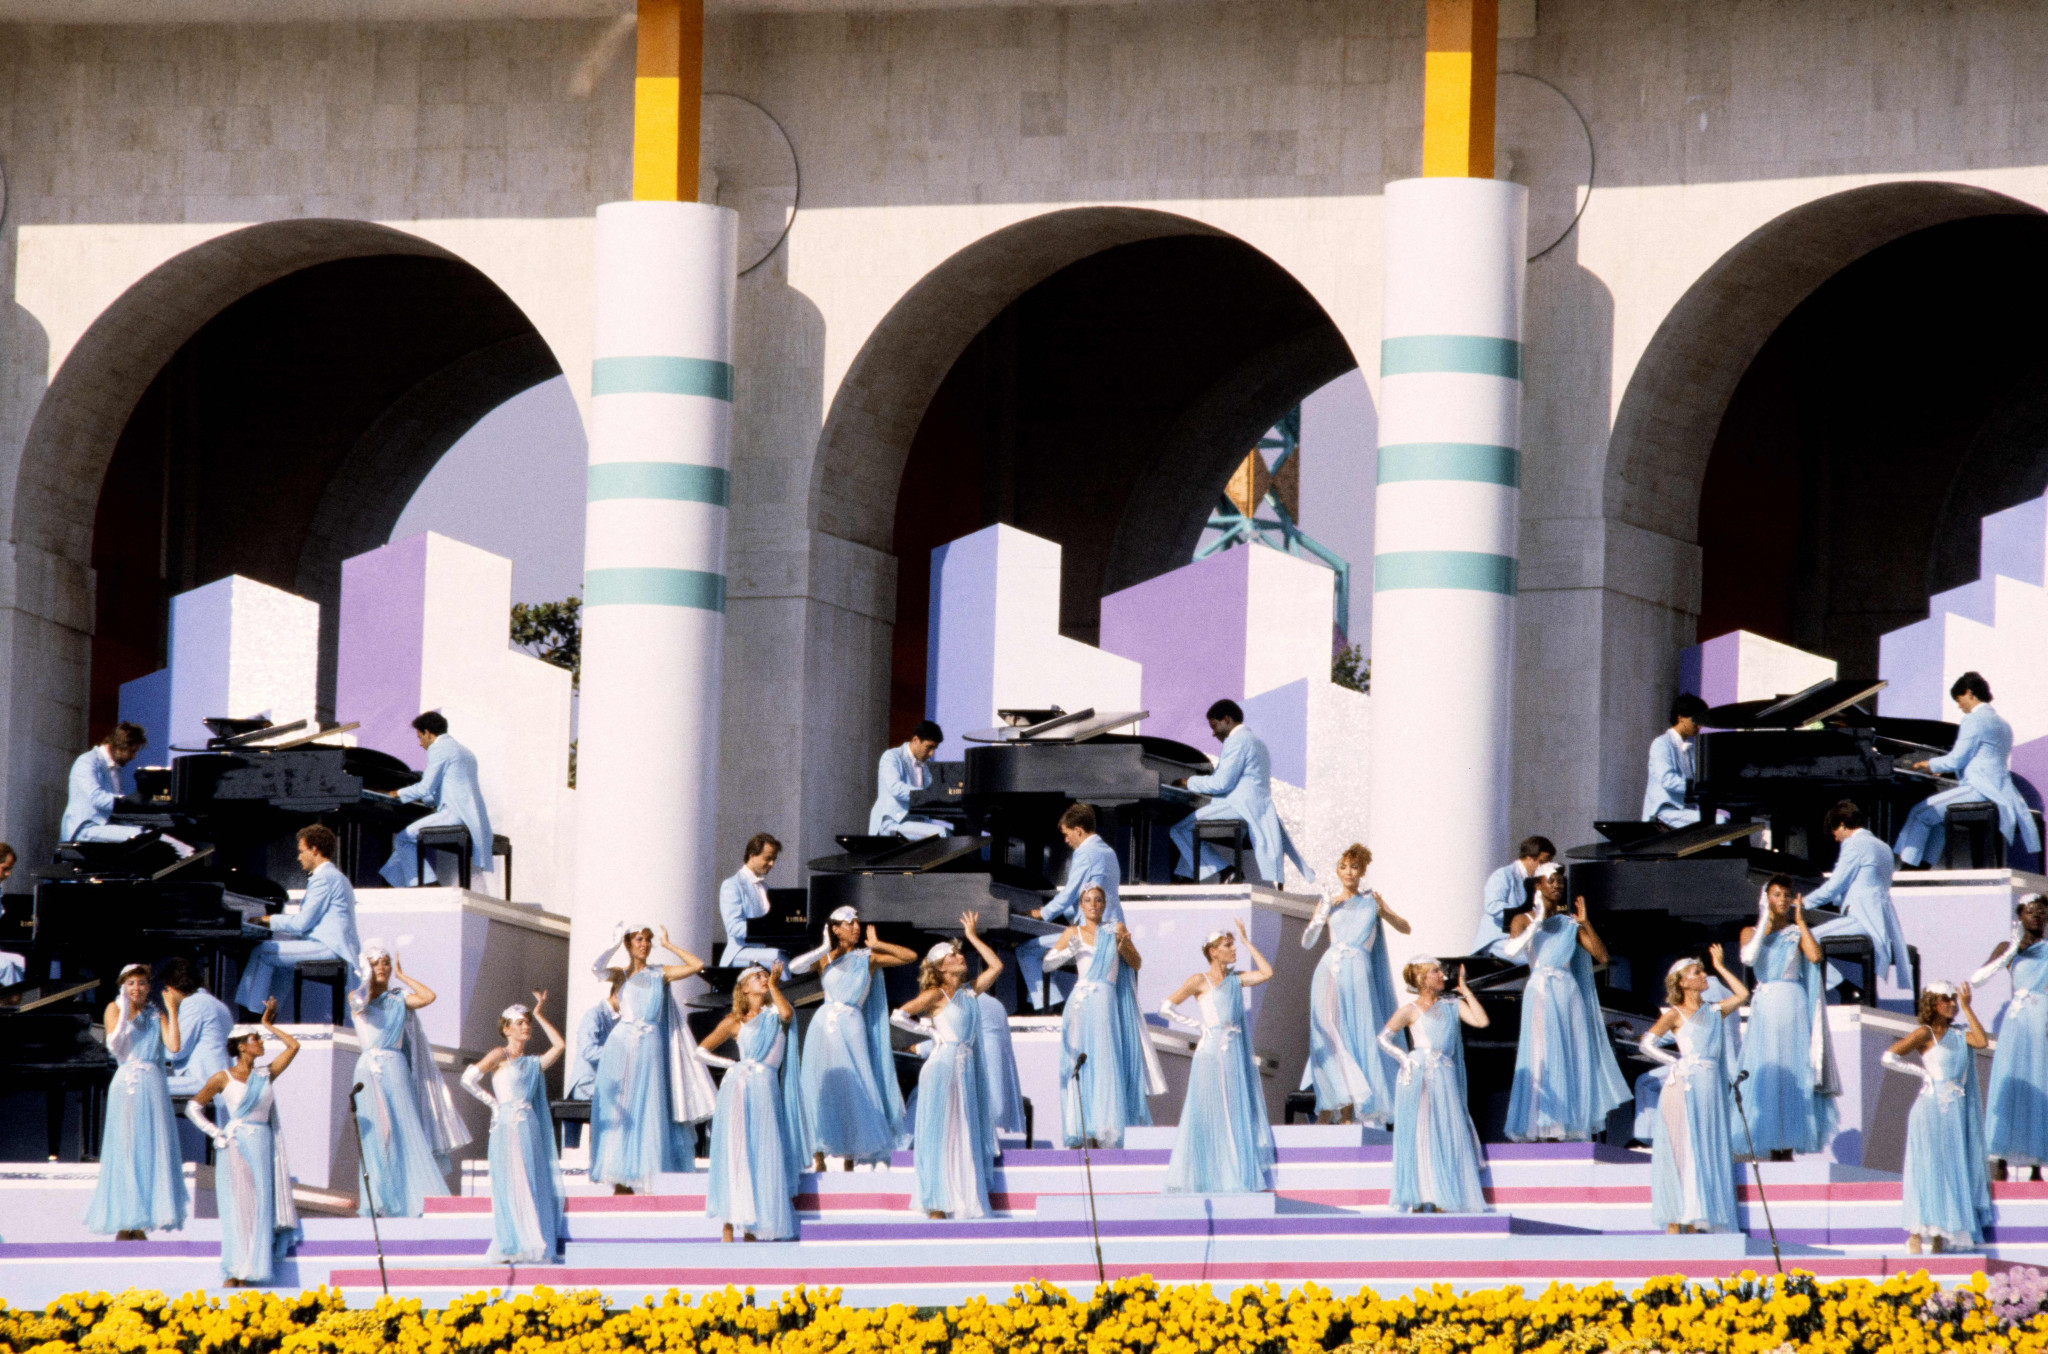 The performance of George Gershwin's Rhapsody in Blue remains amongst the most memorable moments in 100 years of the Los Angeles Coliseum ©Getty Images